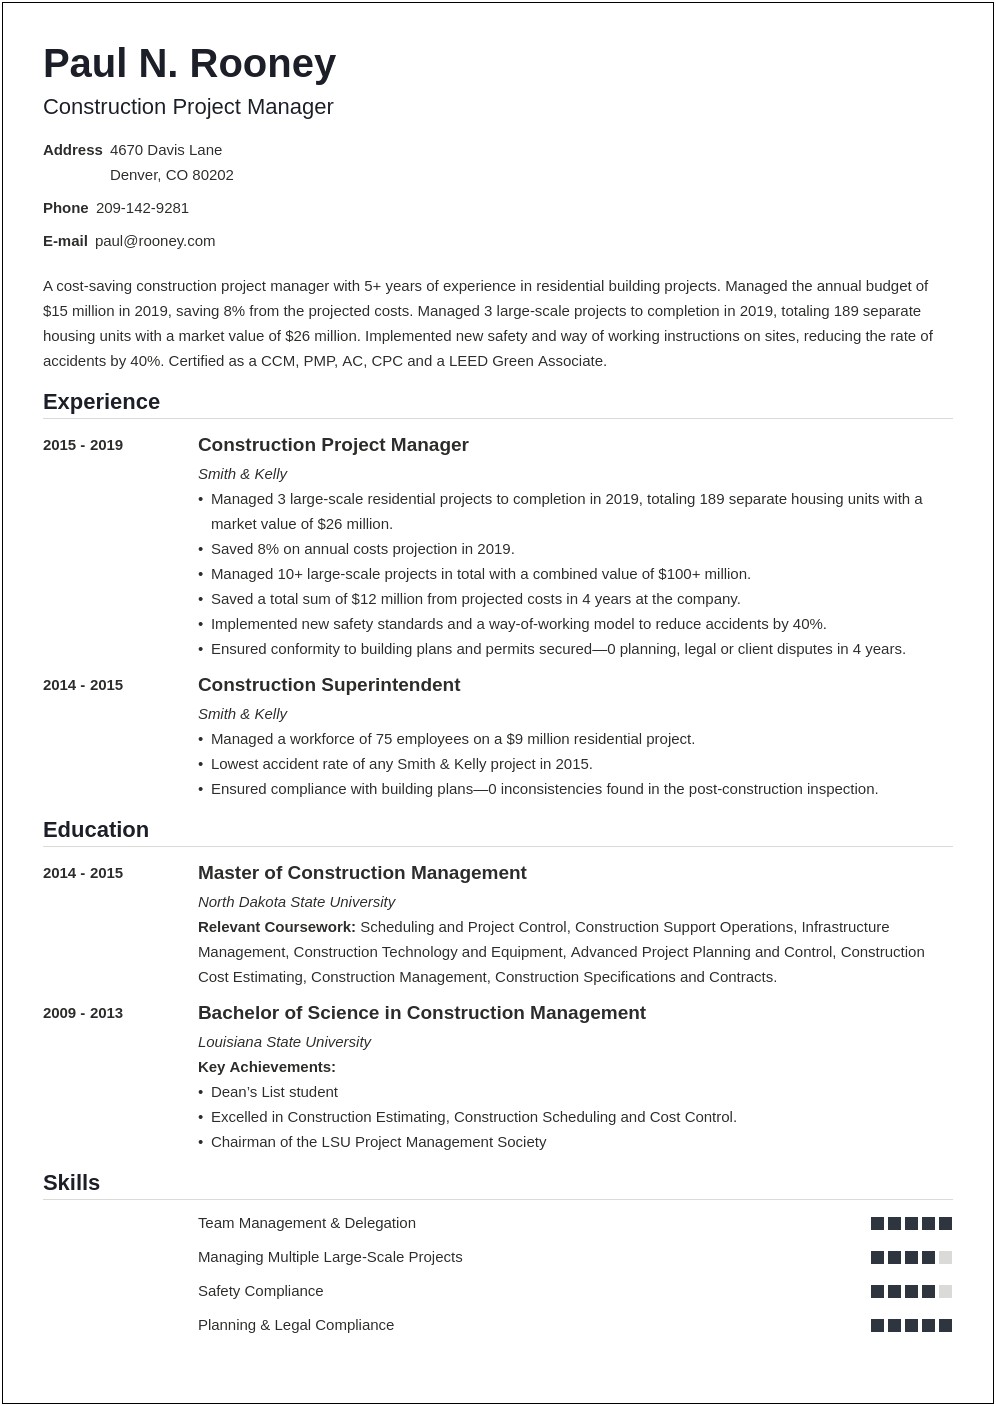 Resume Template For Construction Management